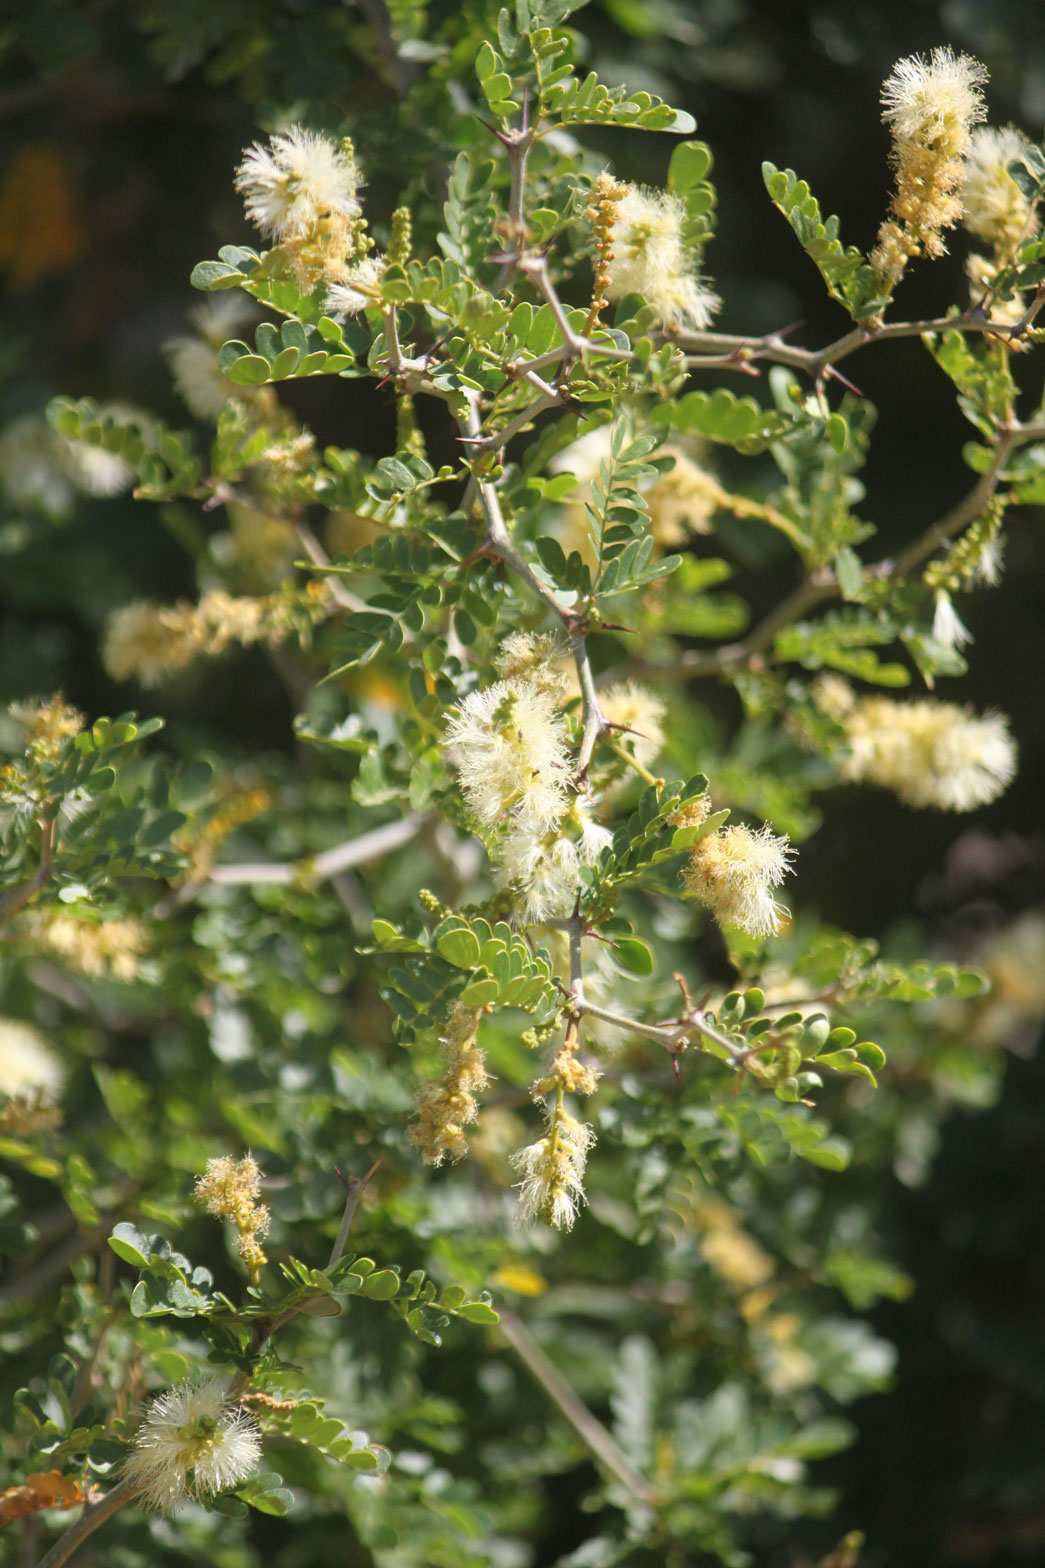 A close-up of the white flowers of the Texas Ebony.